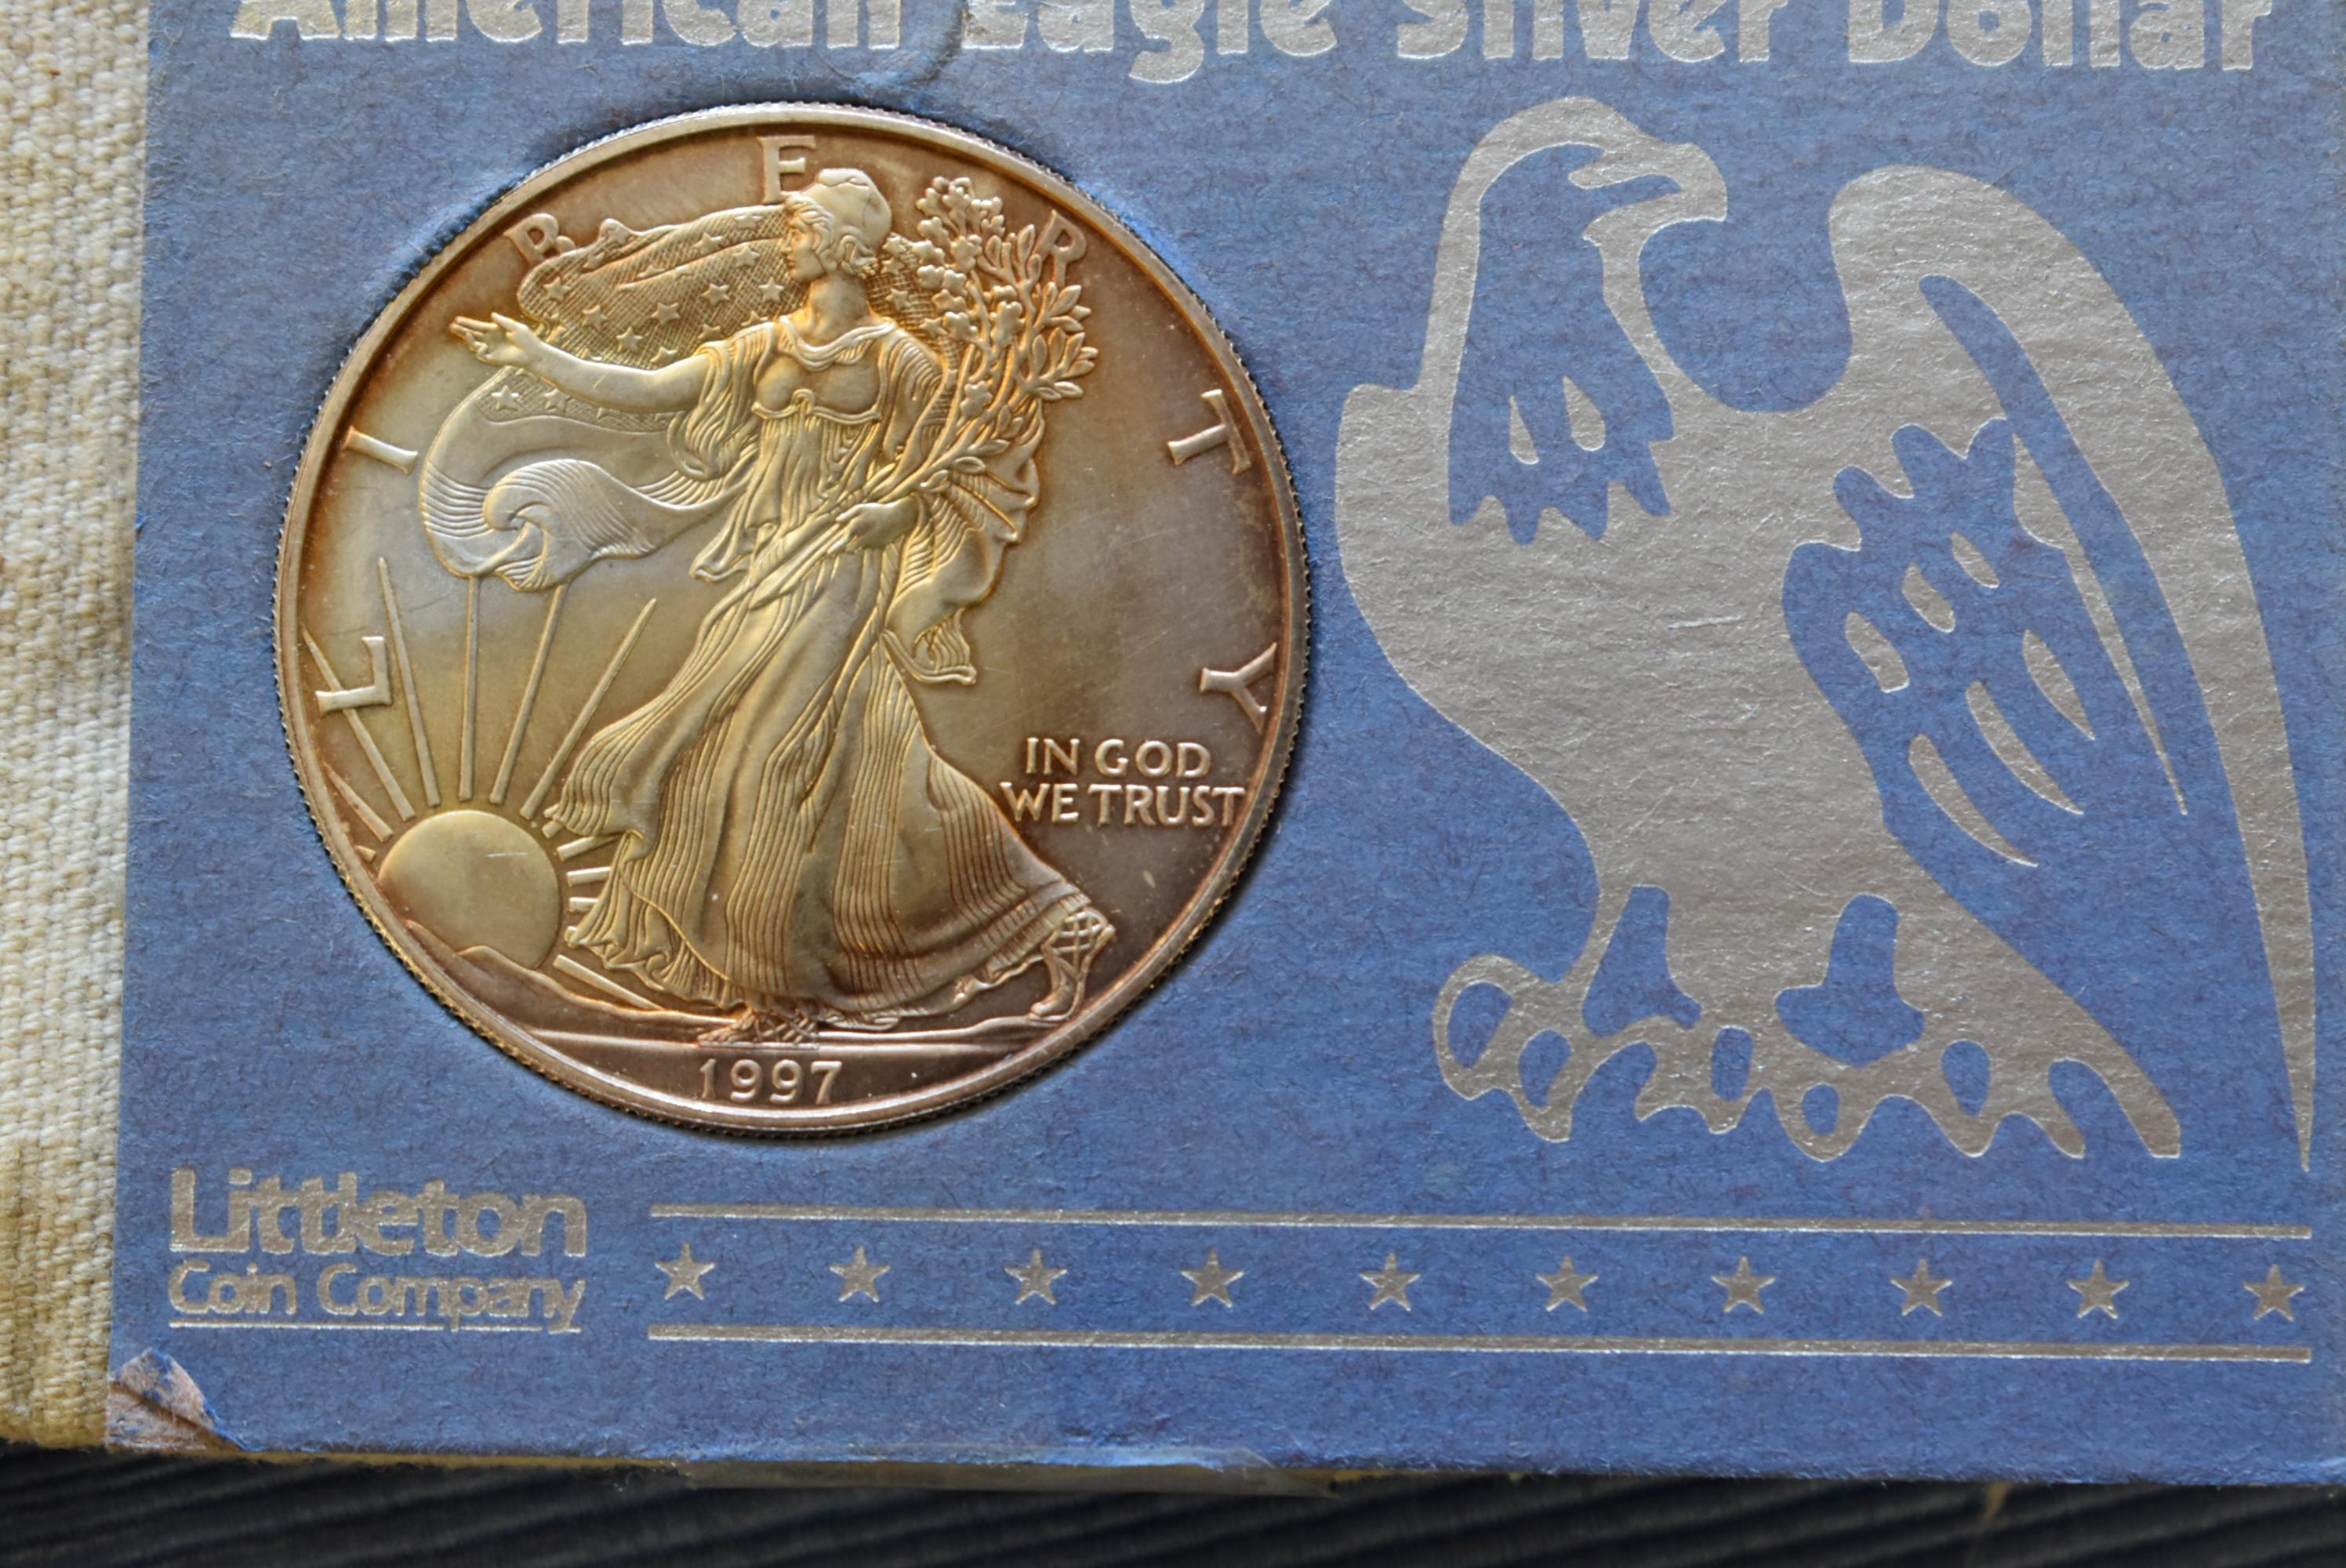 AMERICAN EAGLE SILVER DOLLAR AND MORE!